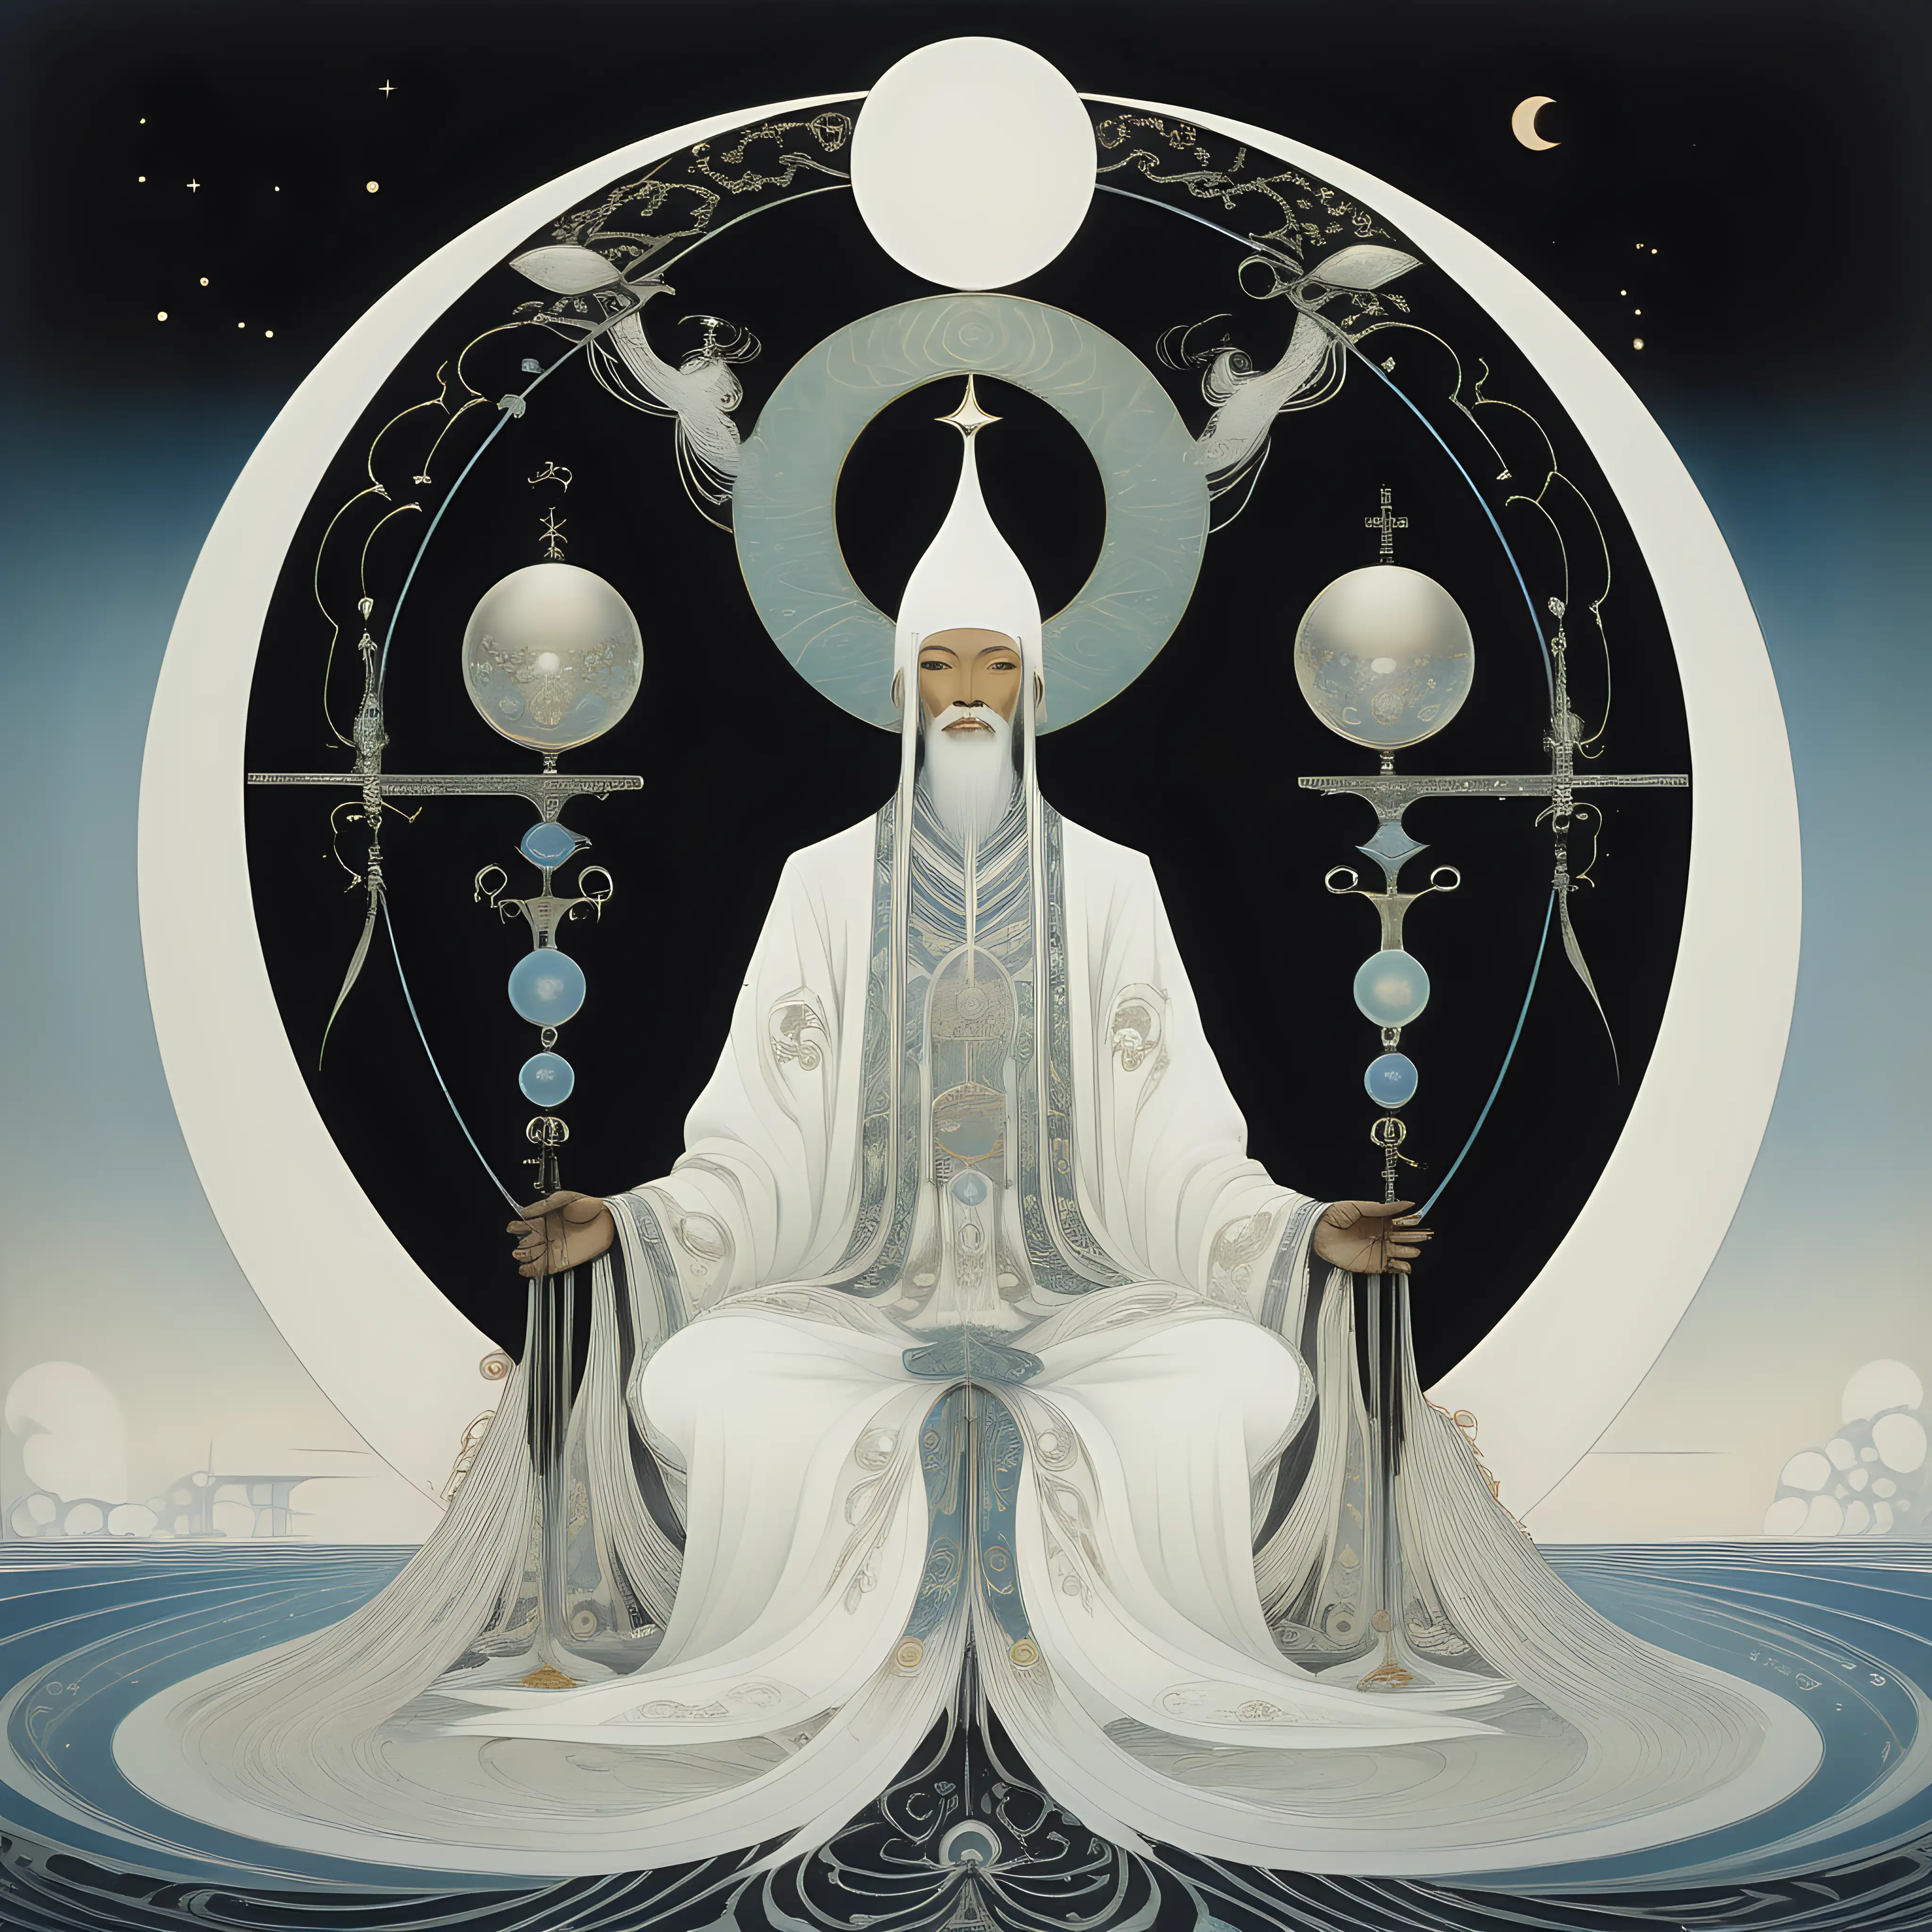 Futuristic Kay Nielsen Style Art Holy Trinity of Asian Males